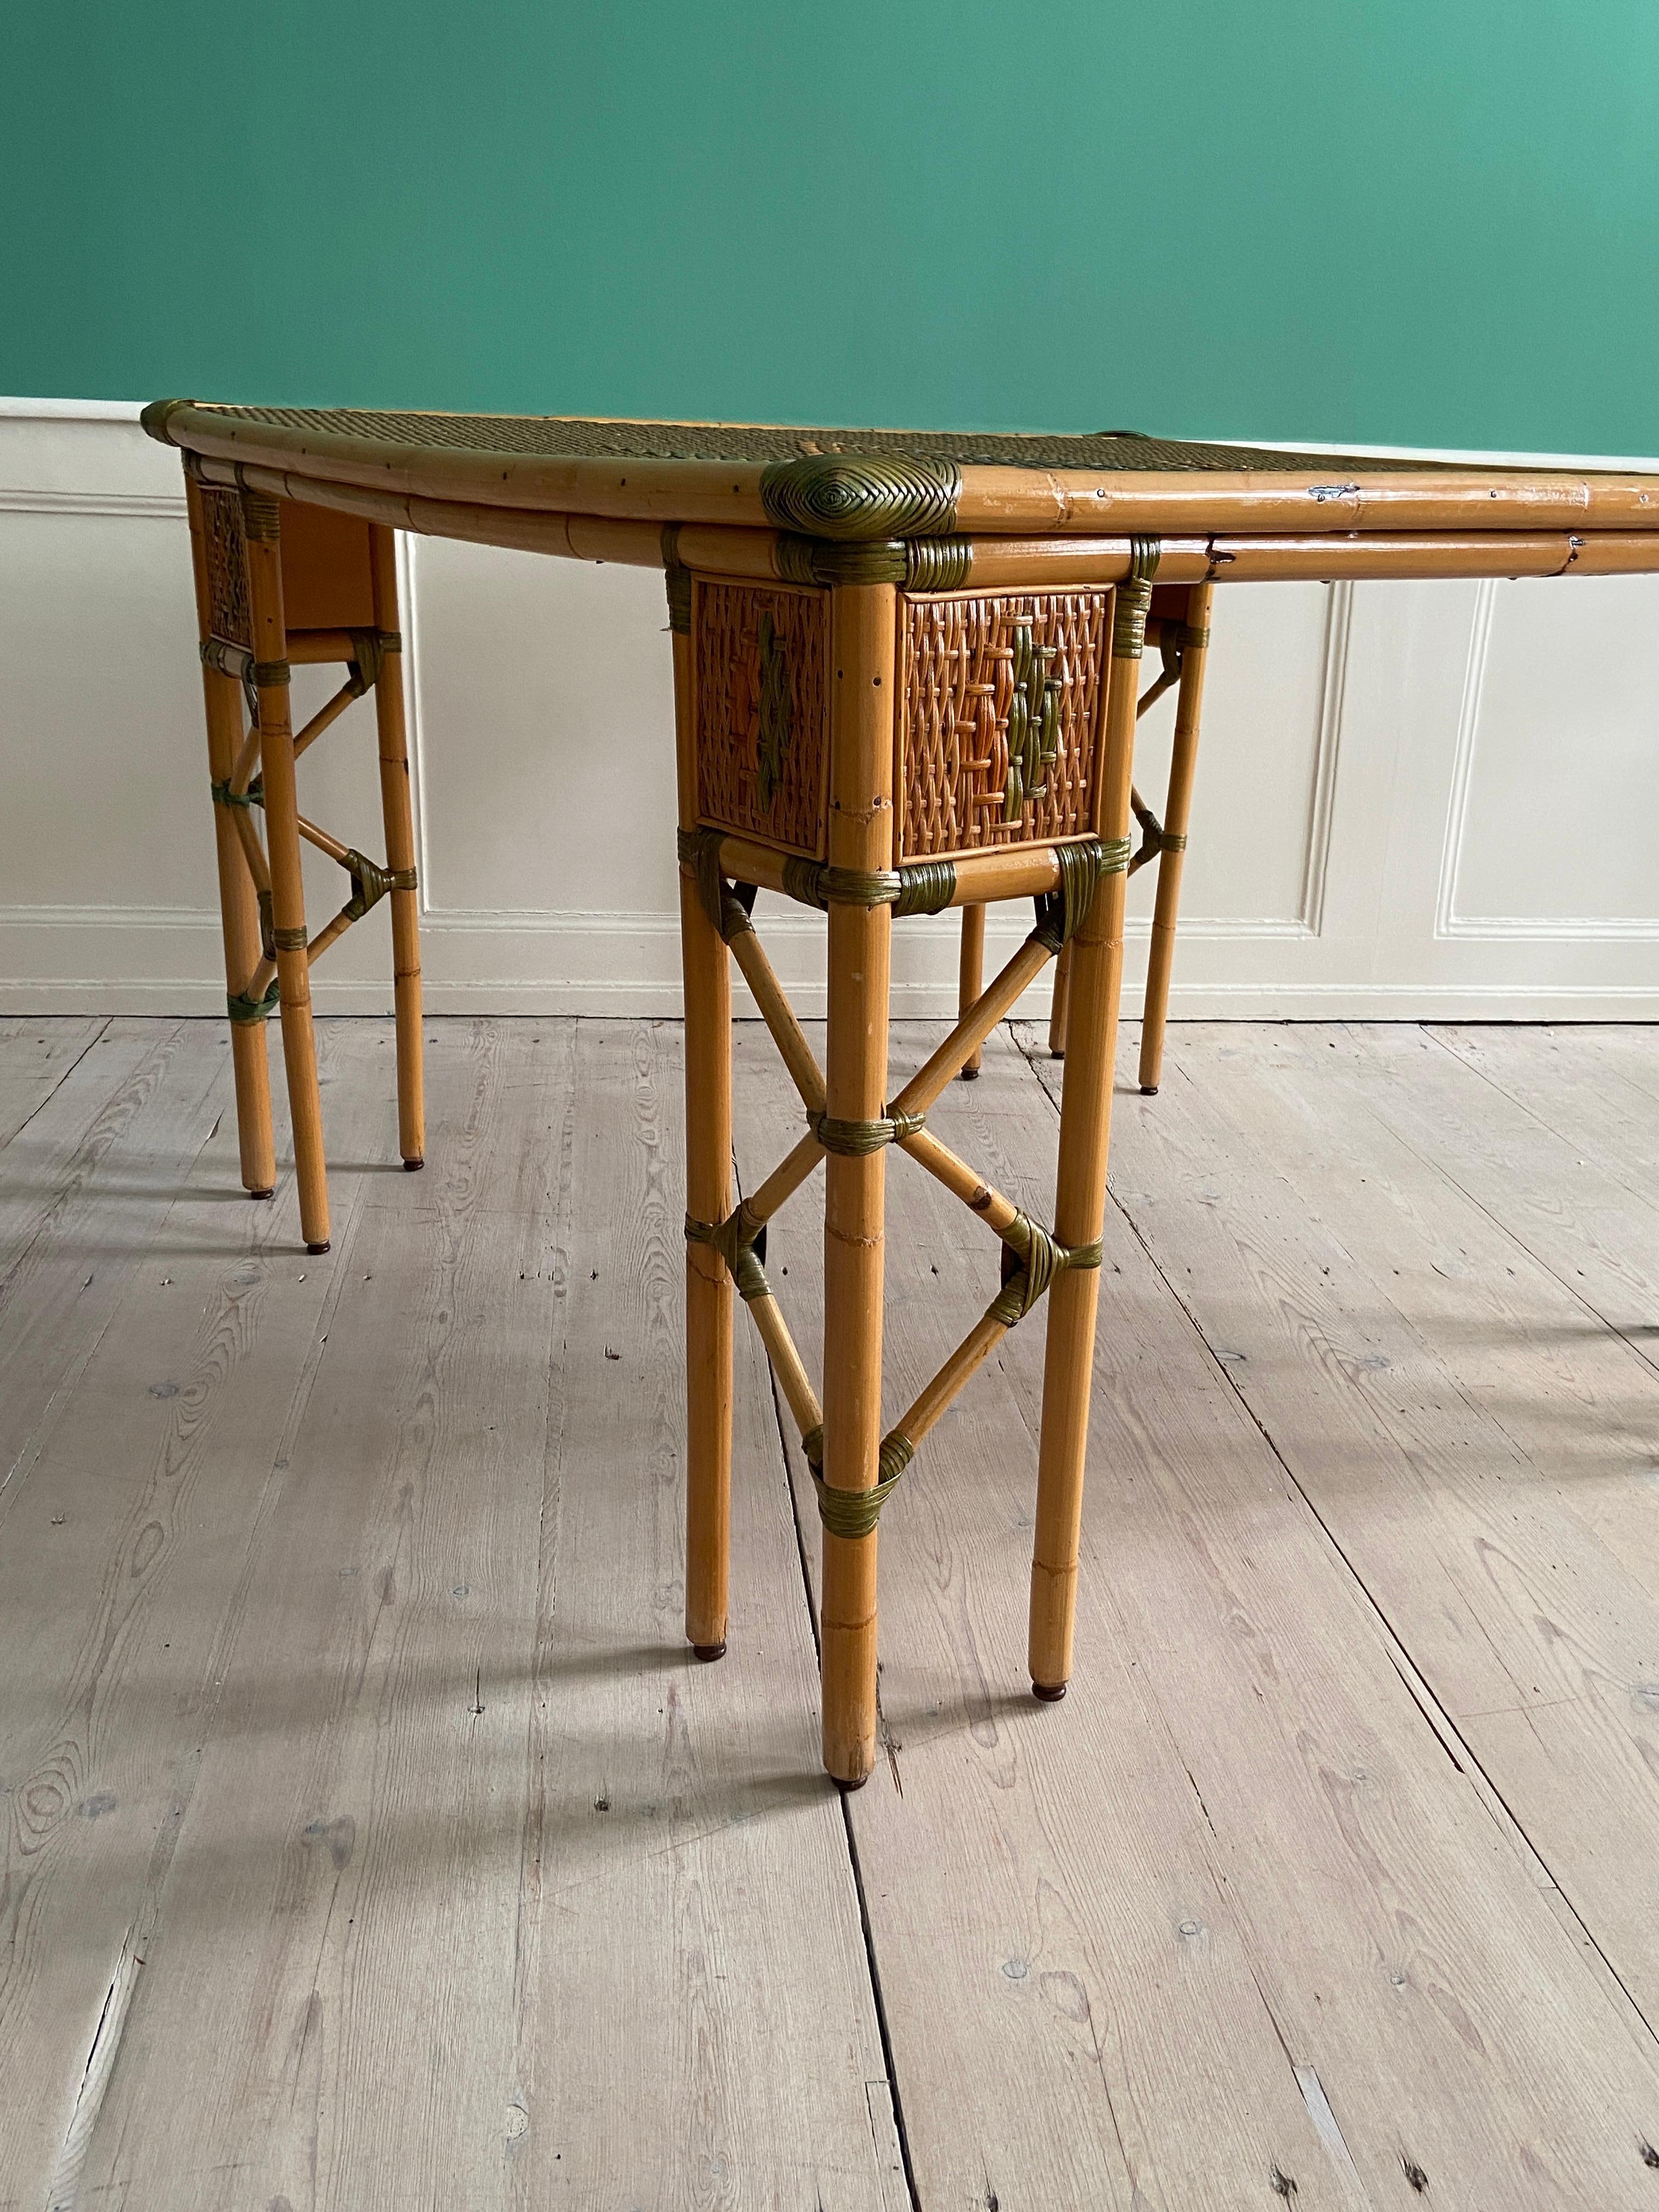 Hand-Woven Vintage Woven Bamboo Table with Brass Details, France, Early 20th Century For Sale